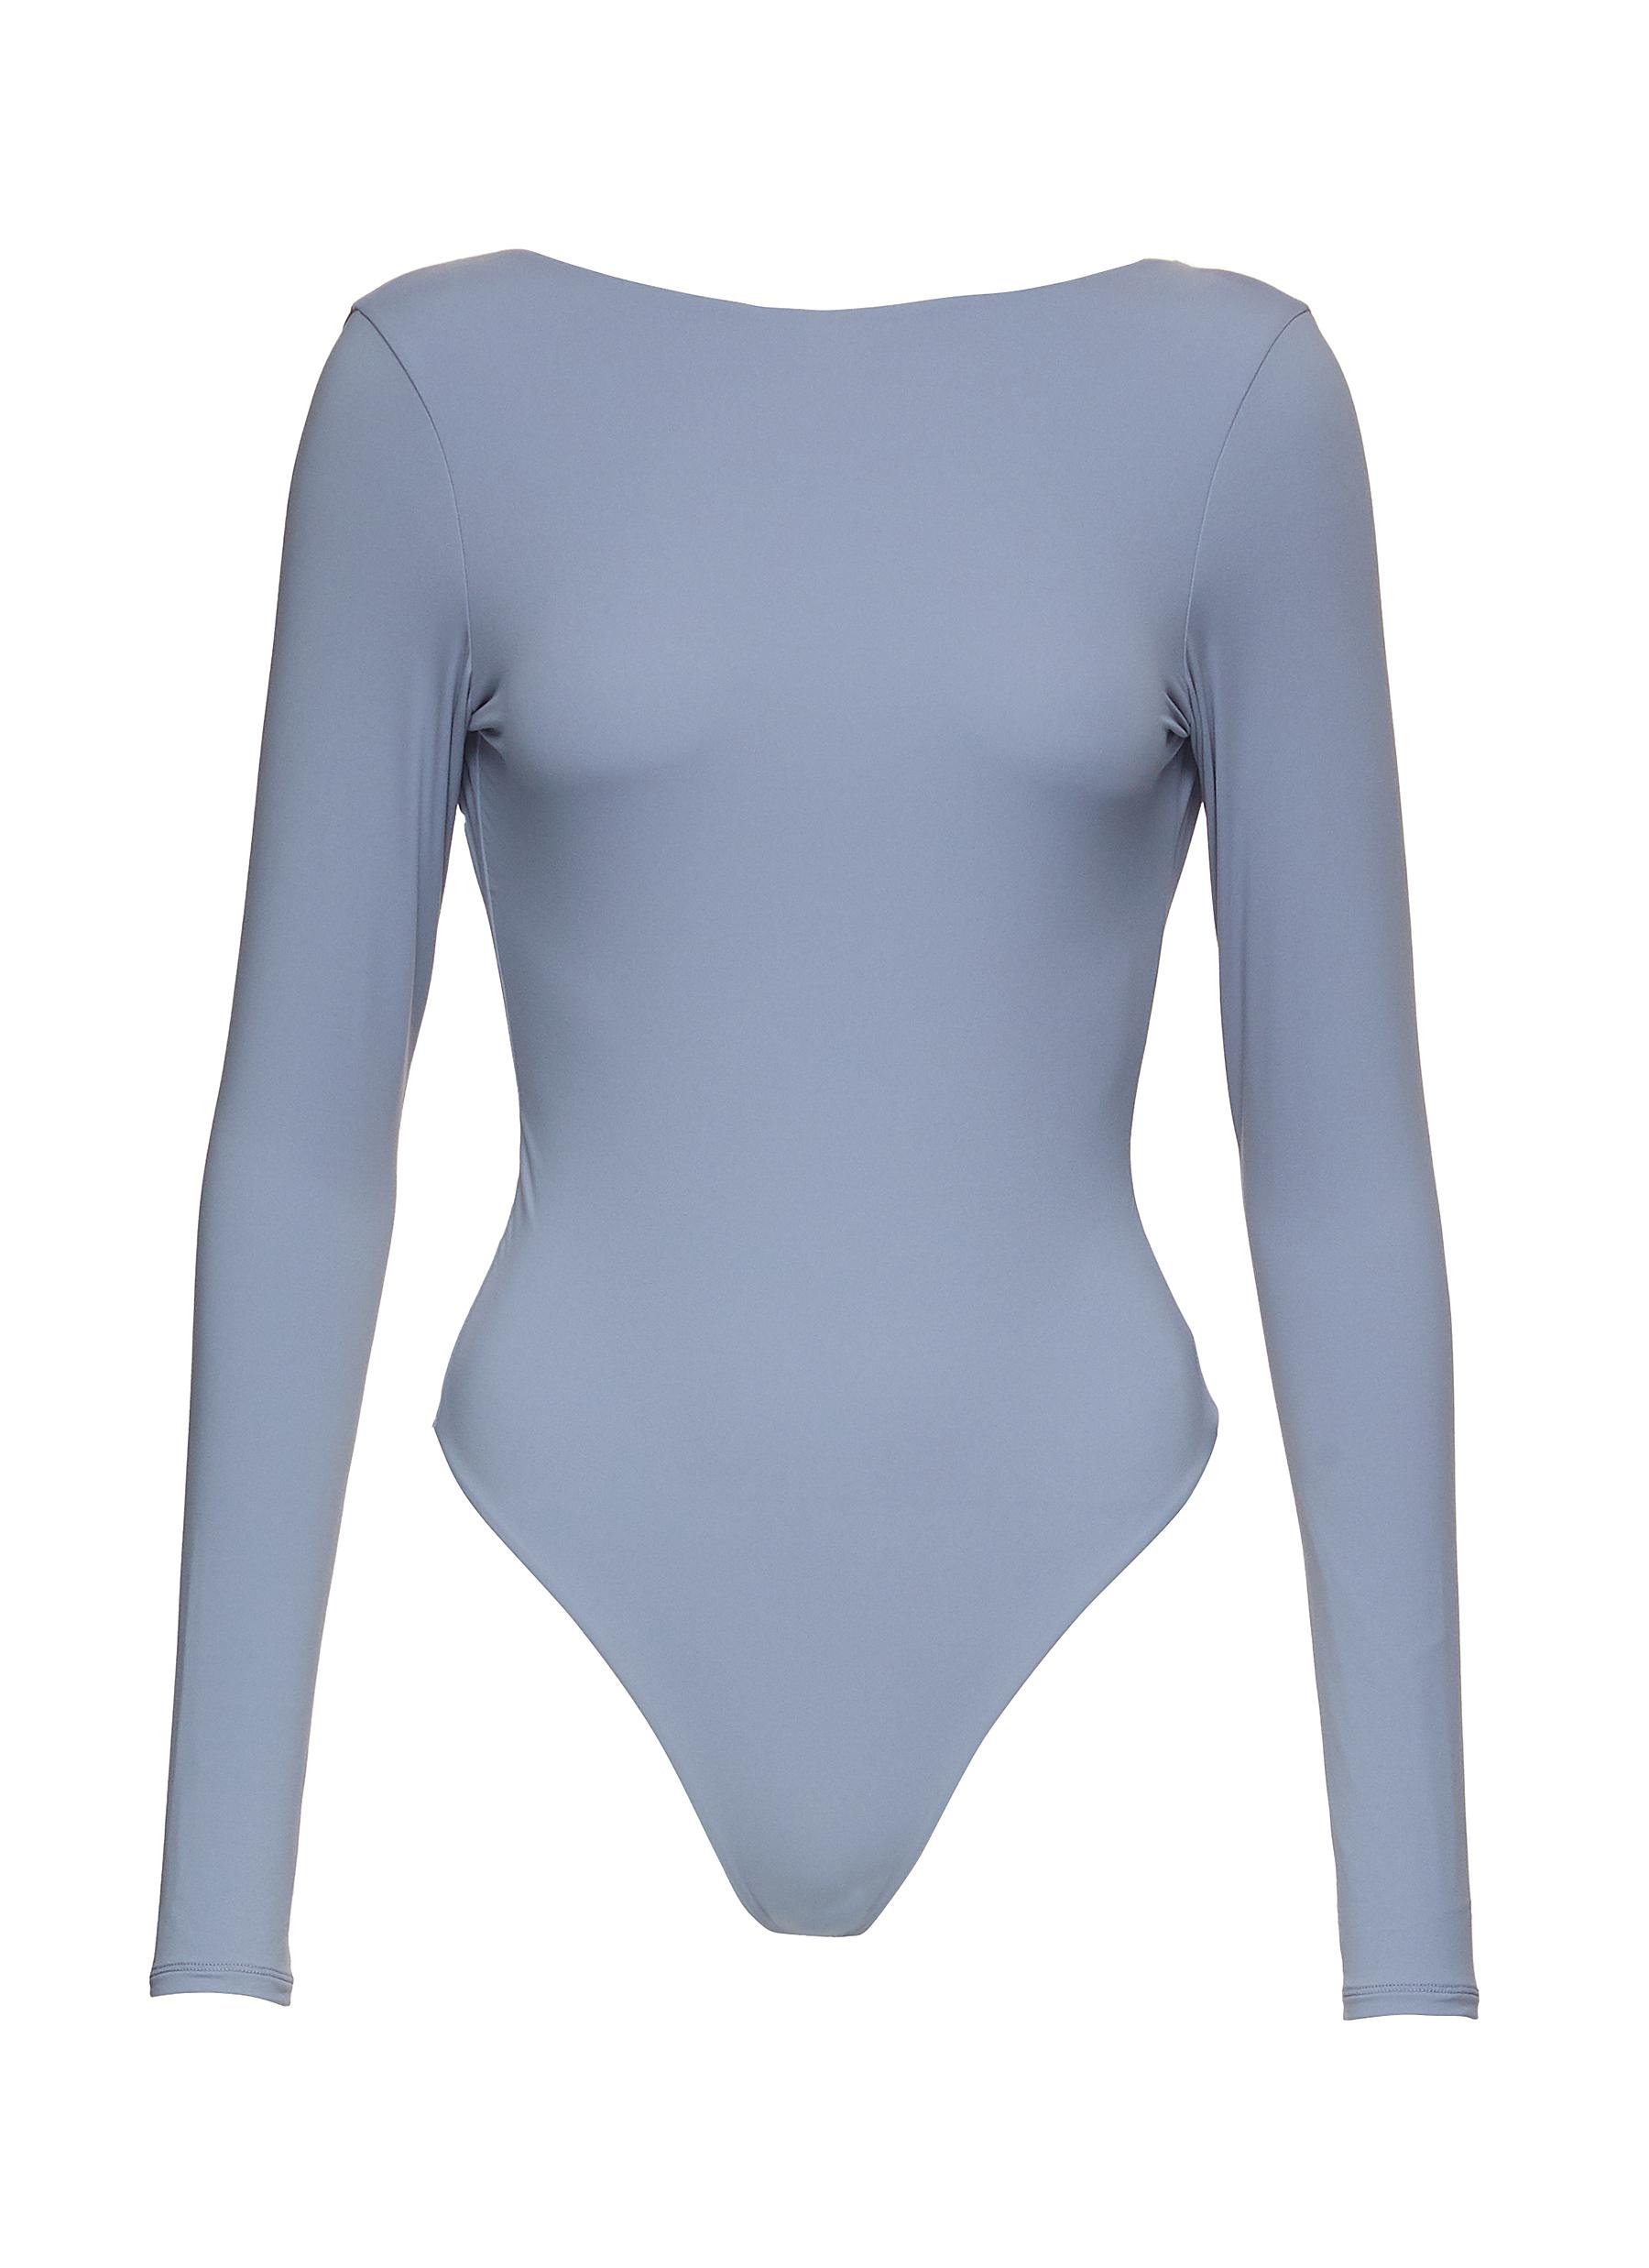 This  'skims inspired' bodysuit is sooo buttery soft! The materi